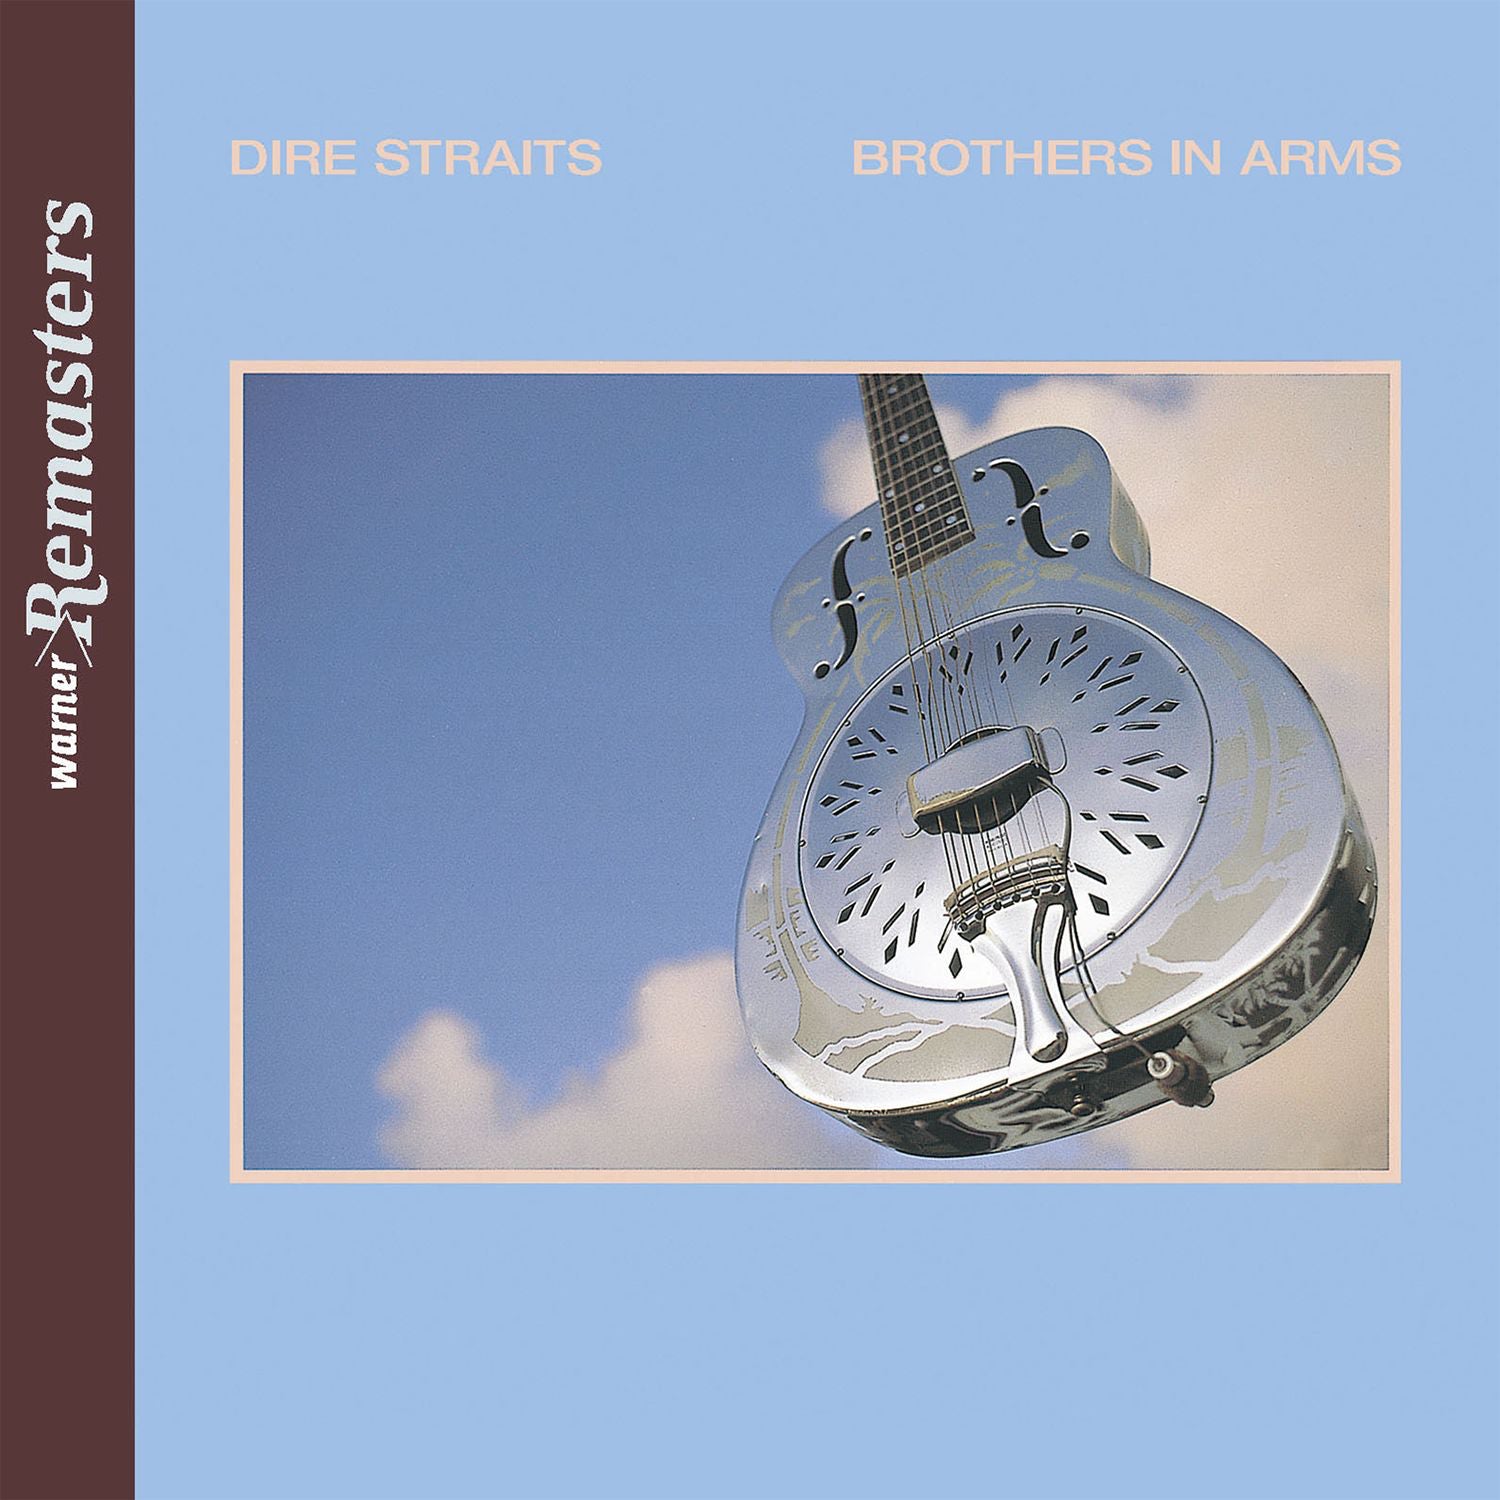 Crosley Record Storage Crate &  Dire Straits Brothers In Arms - Double Vinyl Album Bundle - SILBERSHELL